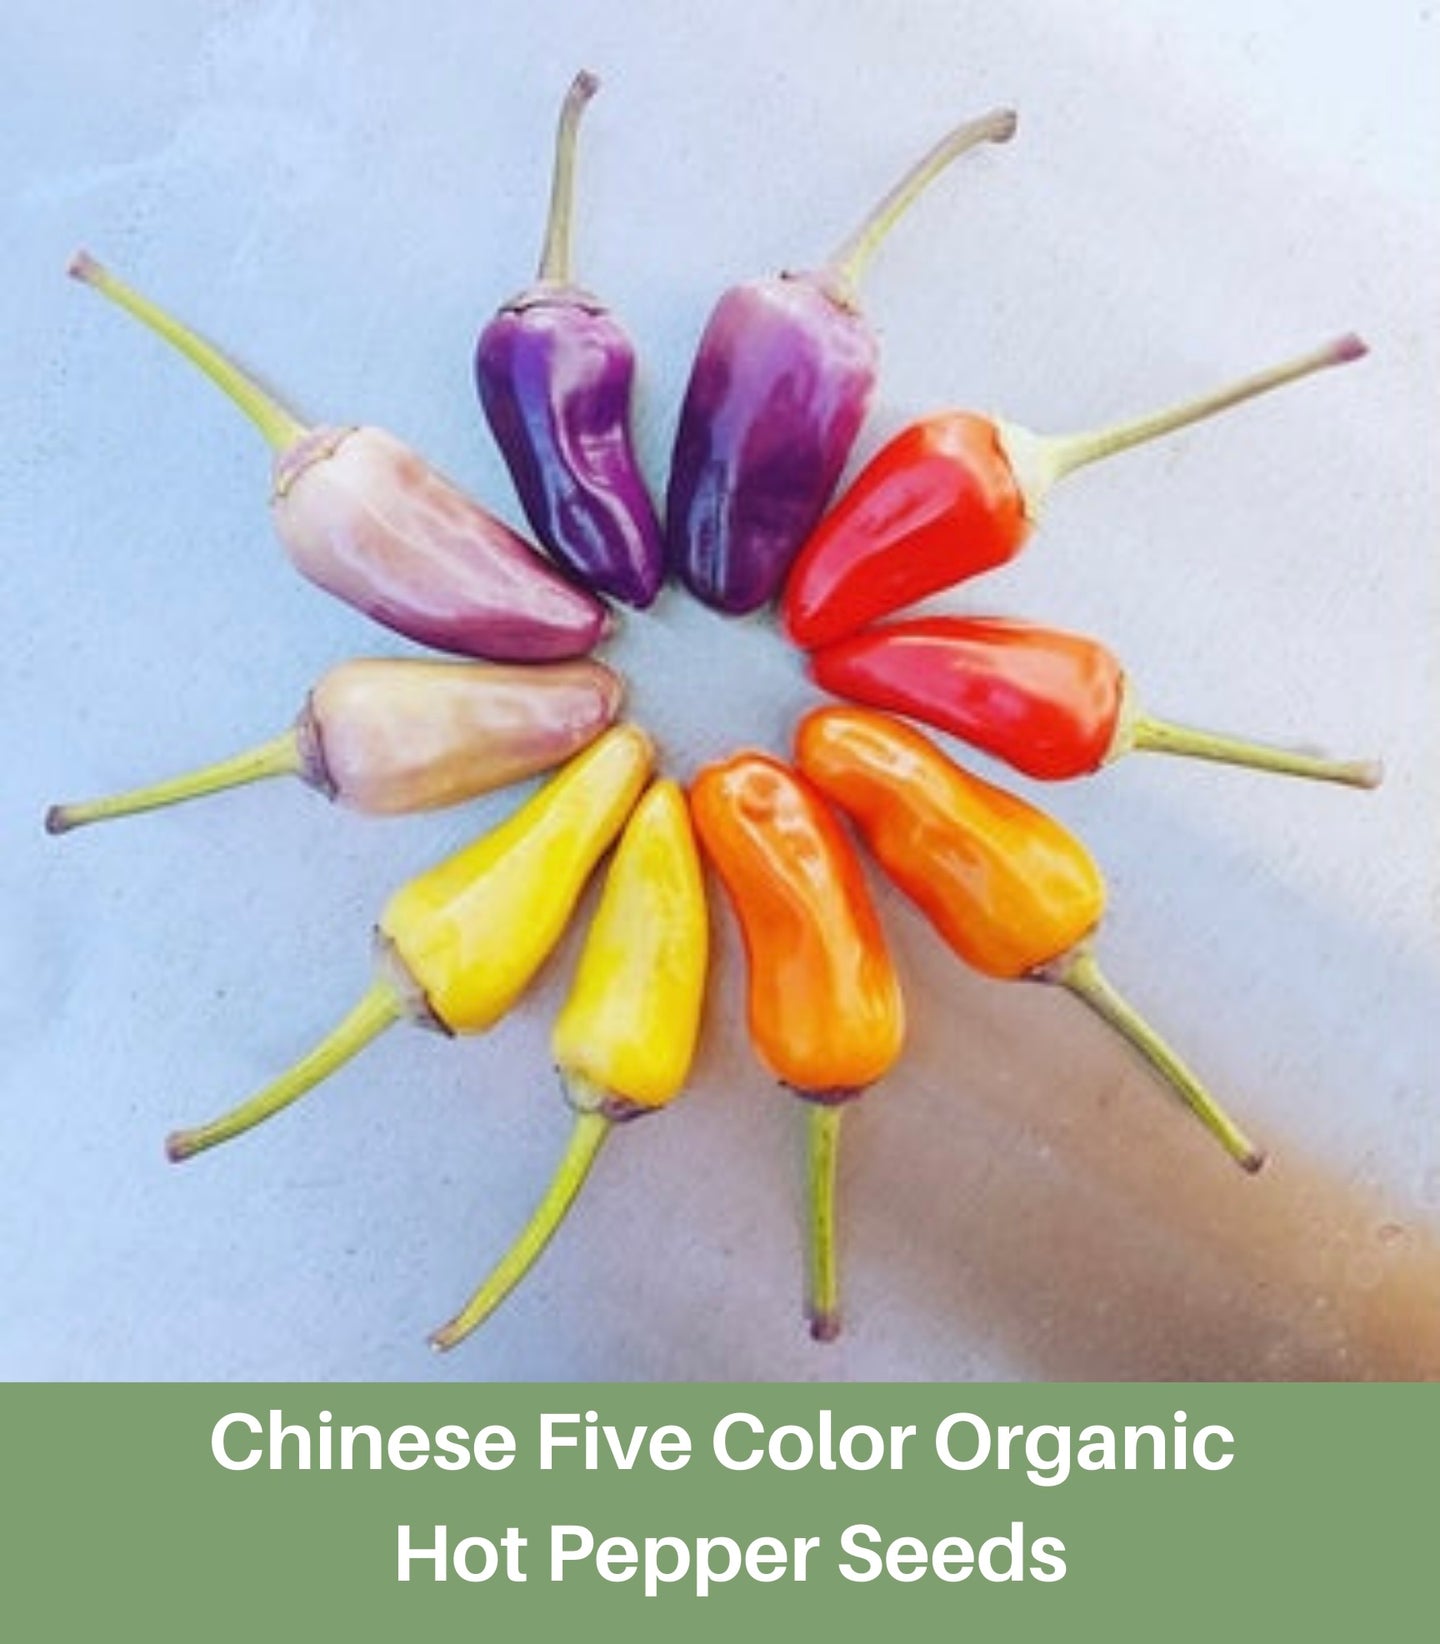 Heirloom Chinese Five Color Organic Hot Pepper Seeds